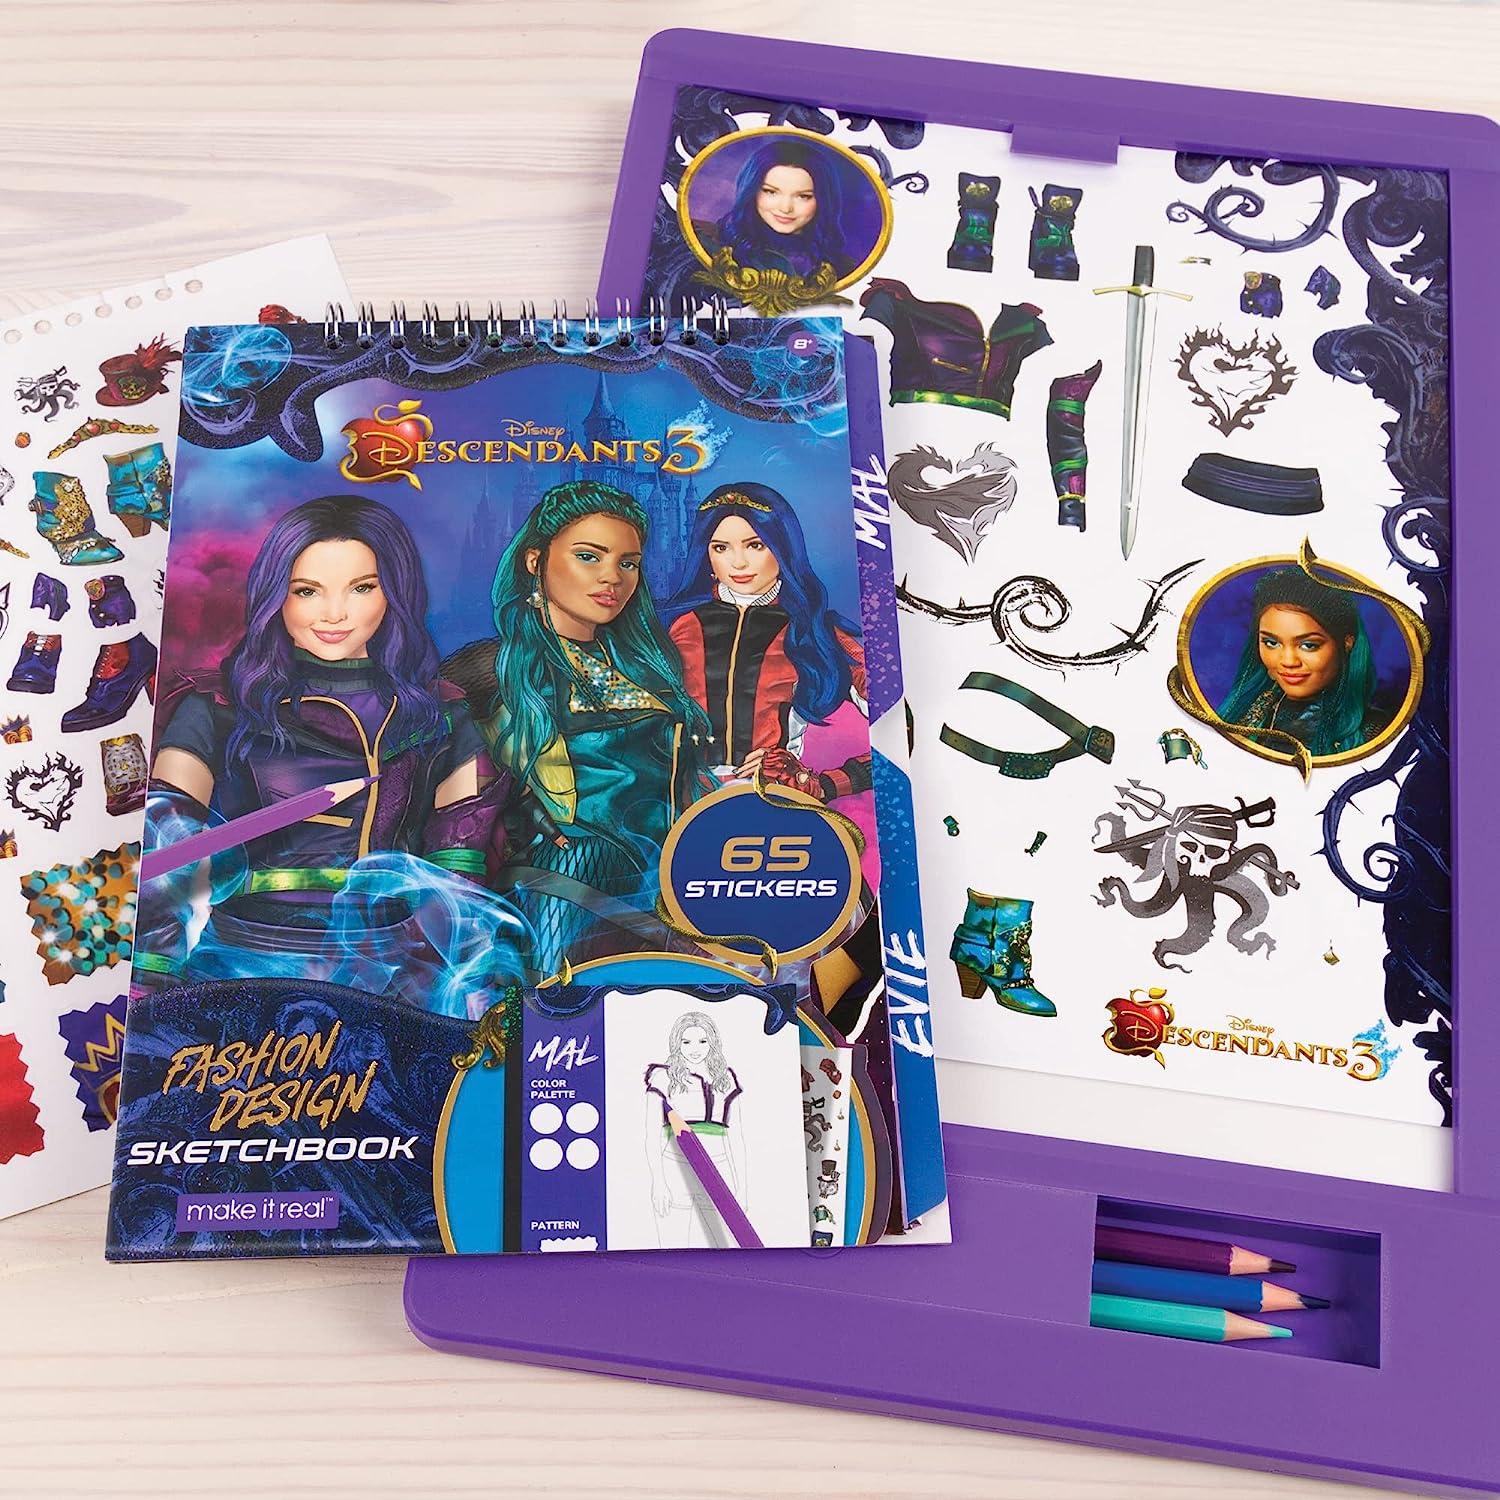 Make It Real - Disney Descendants 3 Sketchbook with Tracing Light Table.  Fashion Design Tracing and Drawing Kit for Girls. Includes Sketch Pages,  Stencils, Stickers, and Backlit Tracing Pad